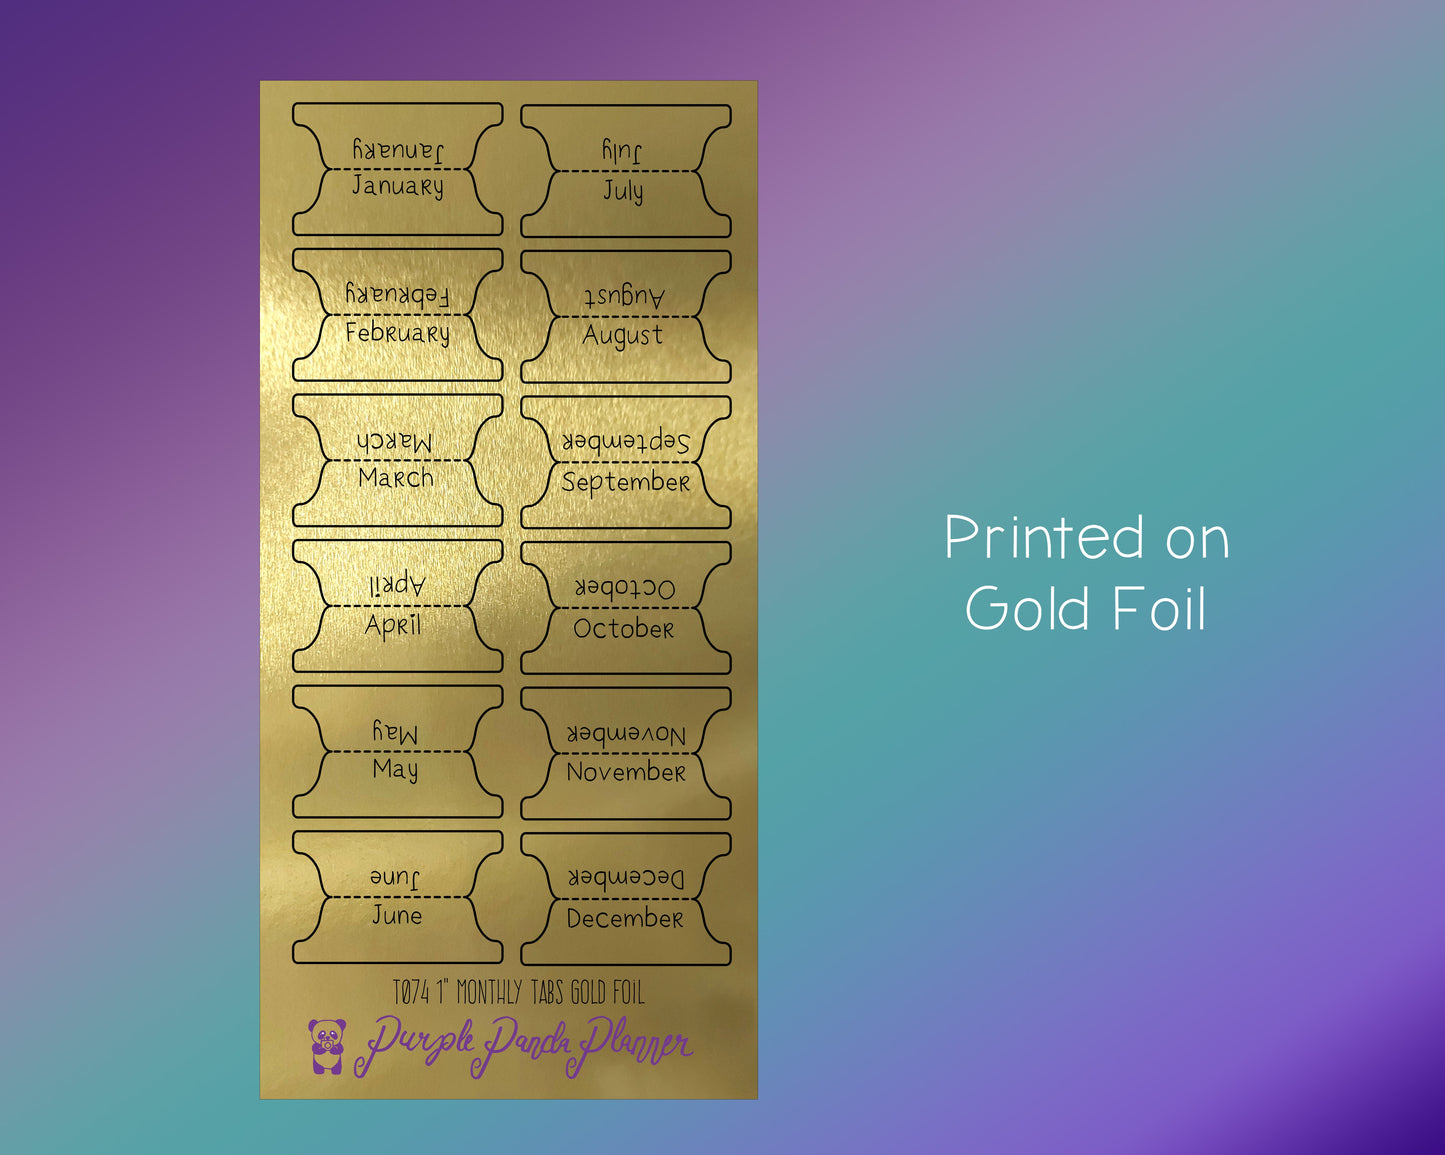 Monthly Tabs 1" - Gold Foil |T074|